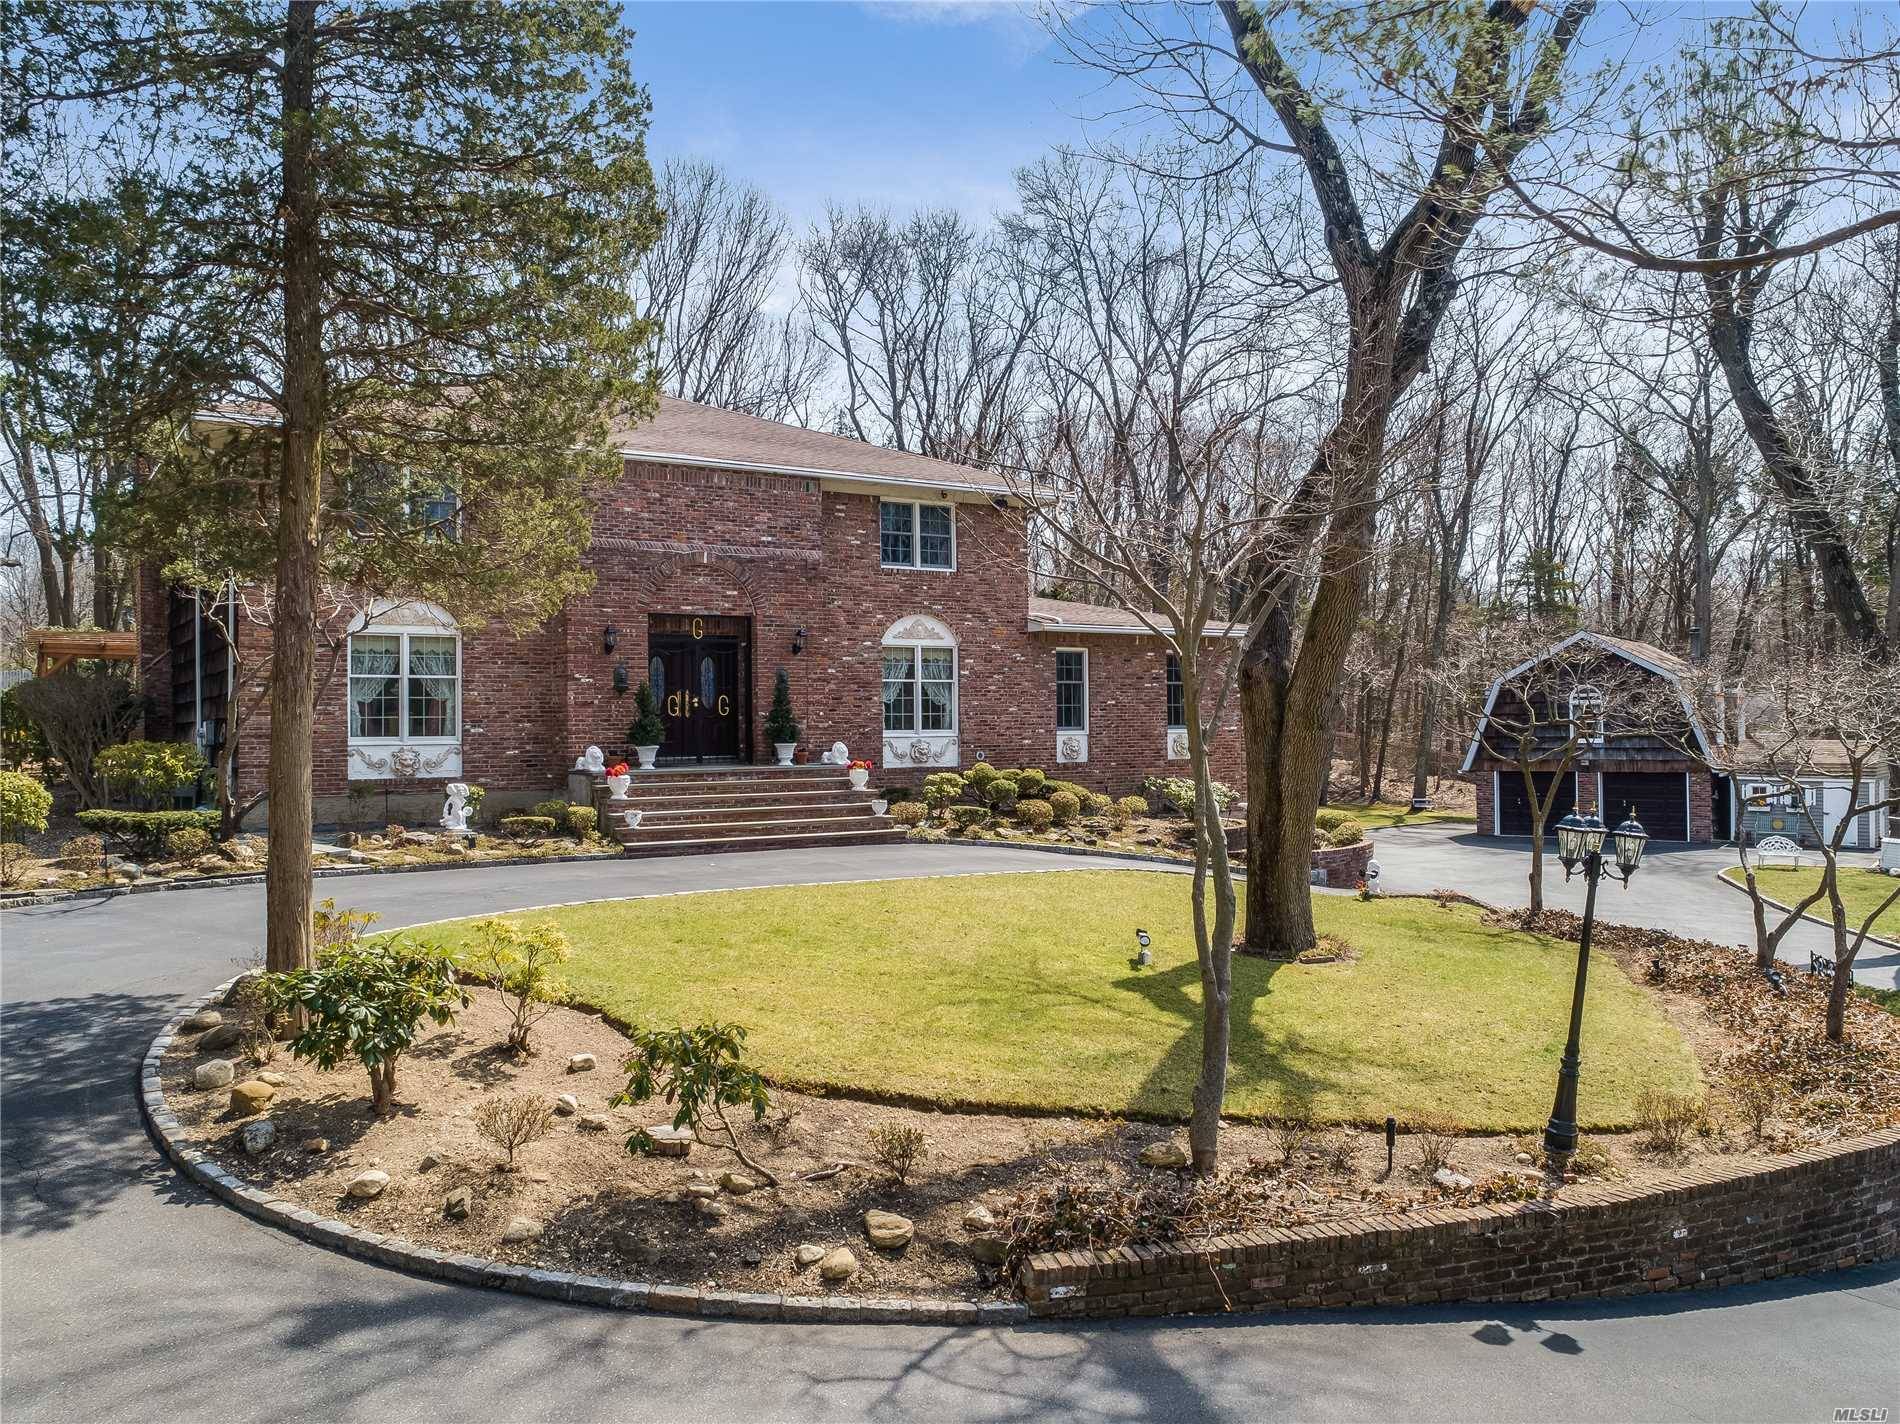 A Magnificent Driveway Leads You To a Trad Colonial, Beautifully Situated on 2 Acres In Upper Brookville.